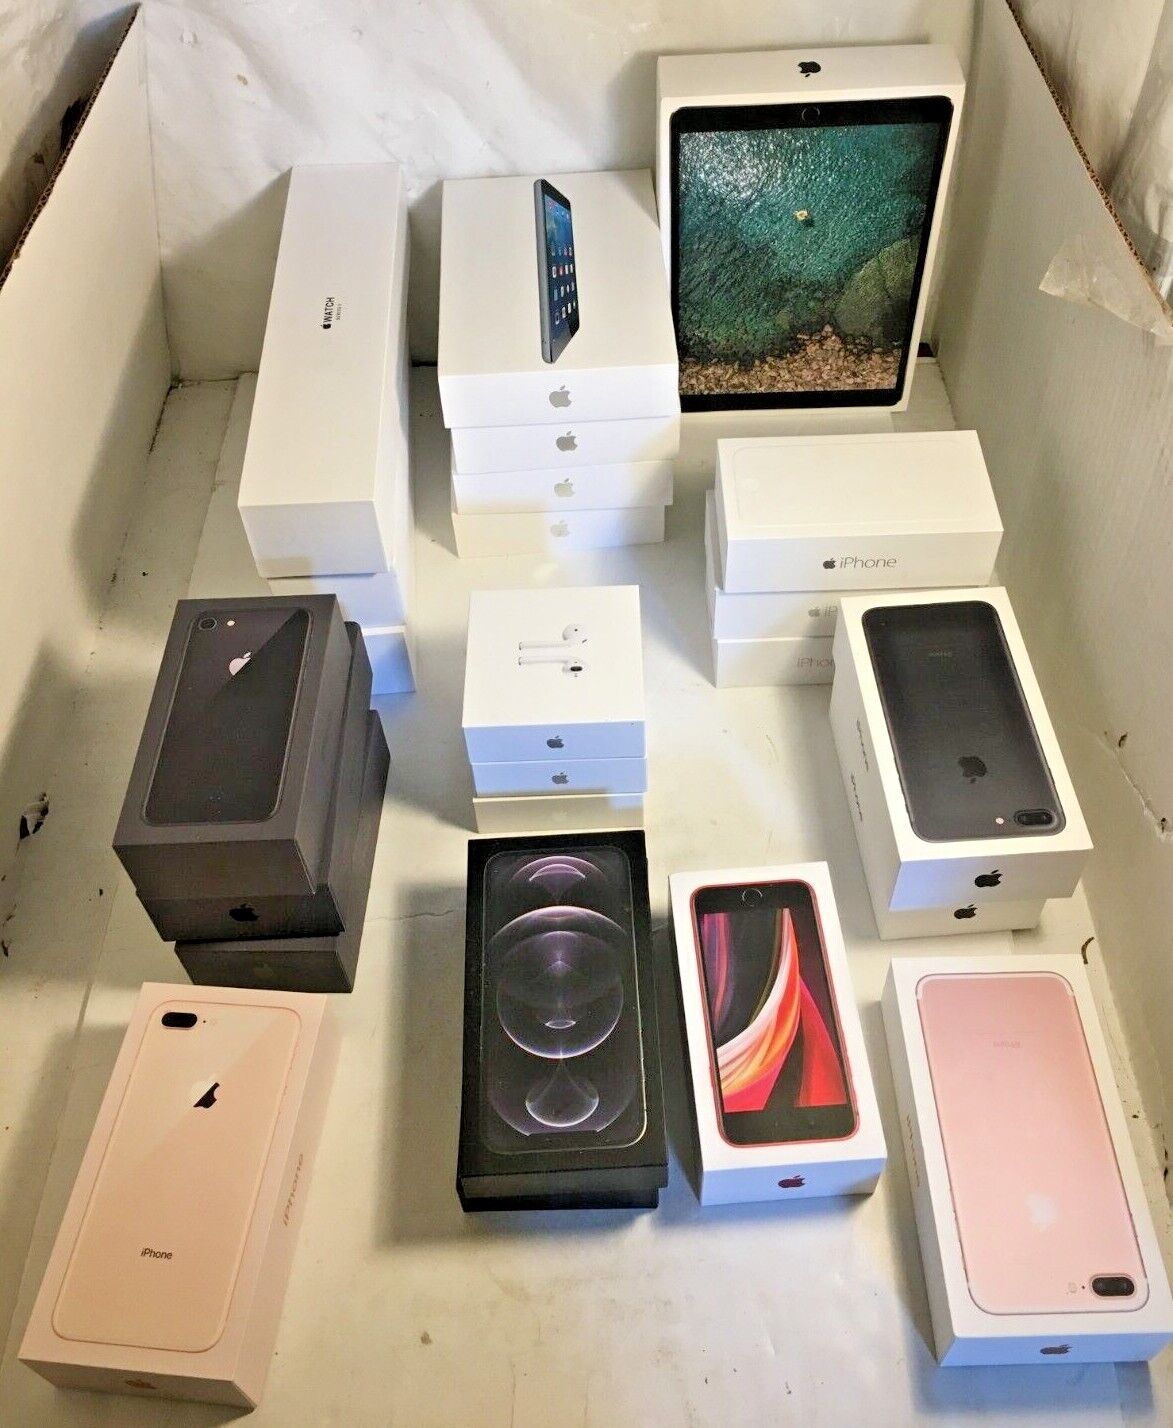 Apple Products Empty Boxes Lot of 21 Various Products IPhones, Apple Watches Etc